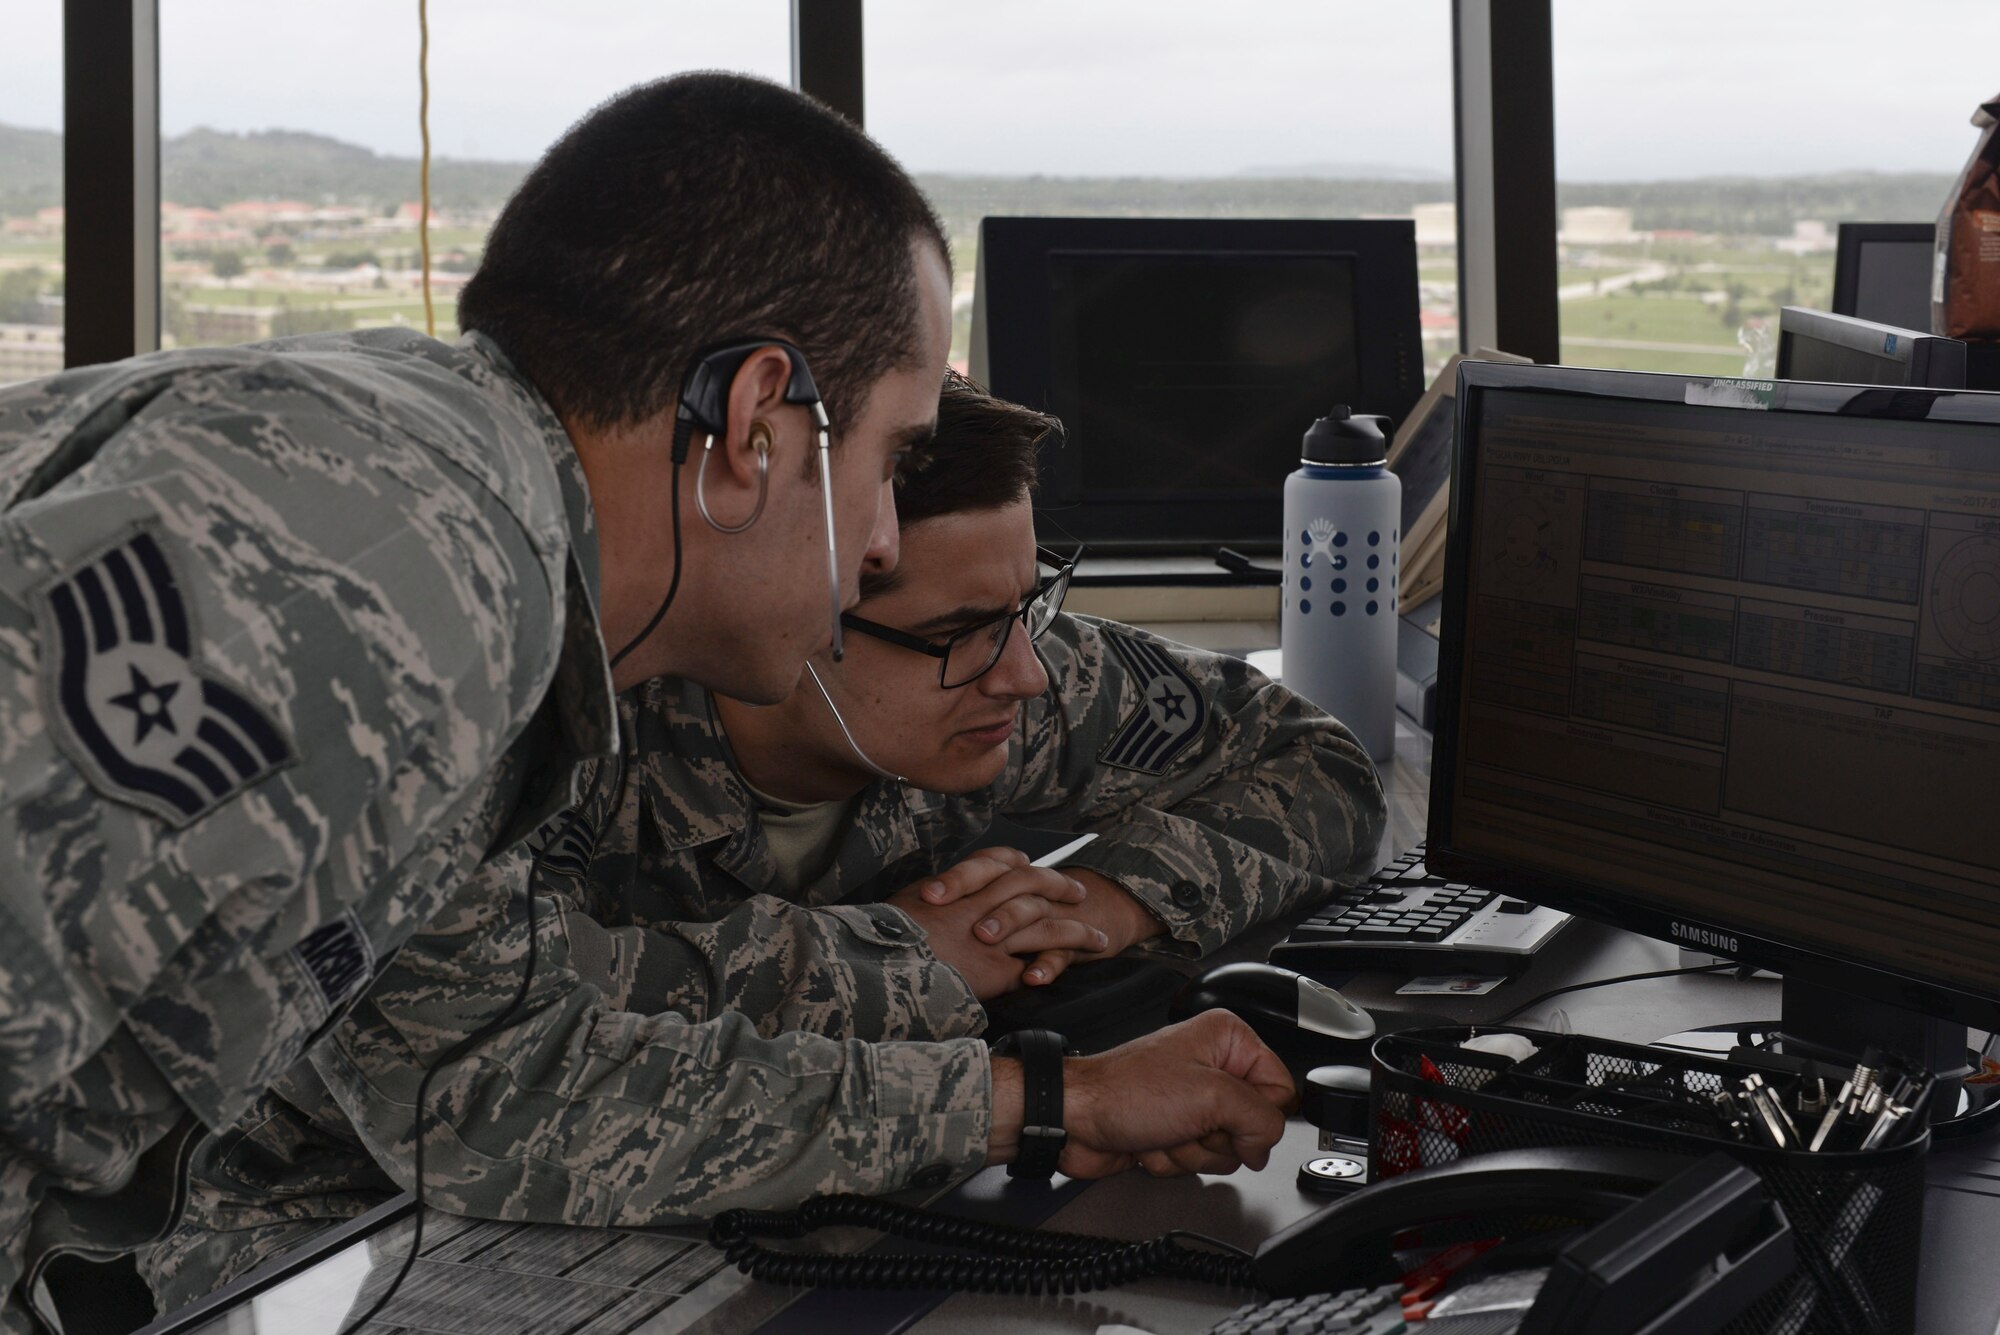 U.S. Air Force Staff Sgt. Nicholas Barsenas, 36th Operation Support Squadron air traffic controller (left), and Staff Sgt. Nicholas Luciano, review flight information inside the updated tower July 17, 2017, at Andersen Air Force Base, Guam. Air traffic control Airmen assigned to the 36th Operation Support Squadron began work in the new tower cab here June 30 after spending almost three months working in the mobile tower unit on the flightline. (U.S. Air Force photo by Airman 1st Class Gerald Willis)